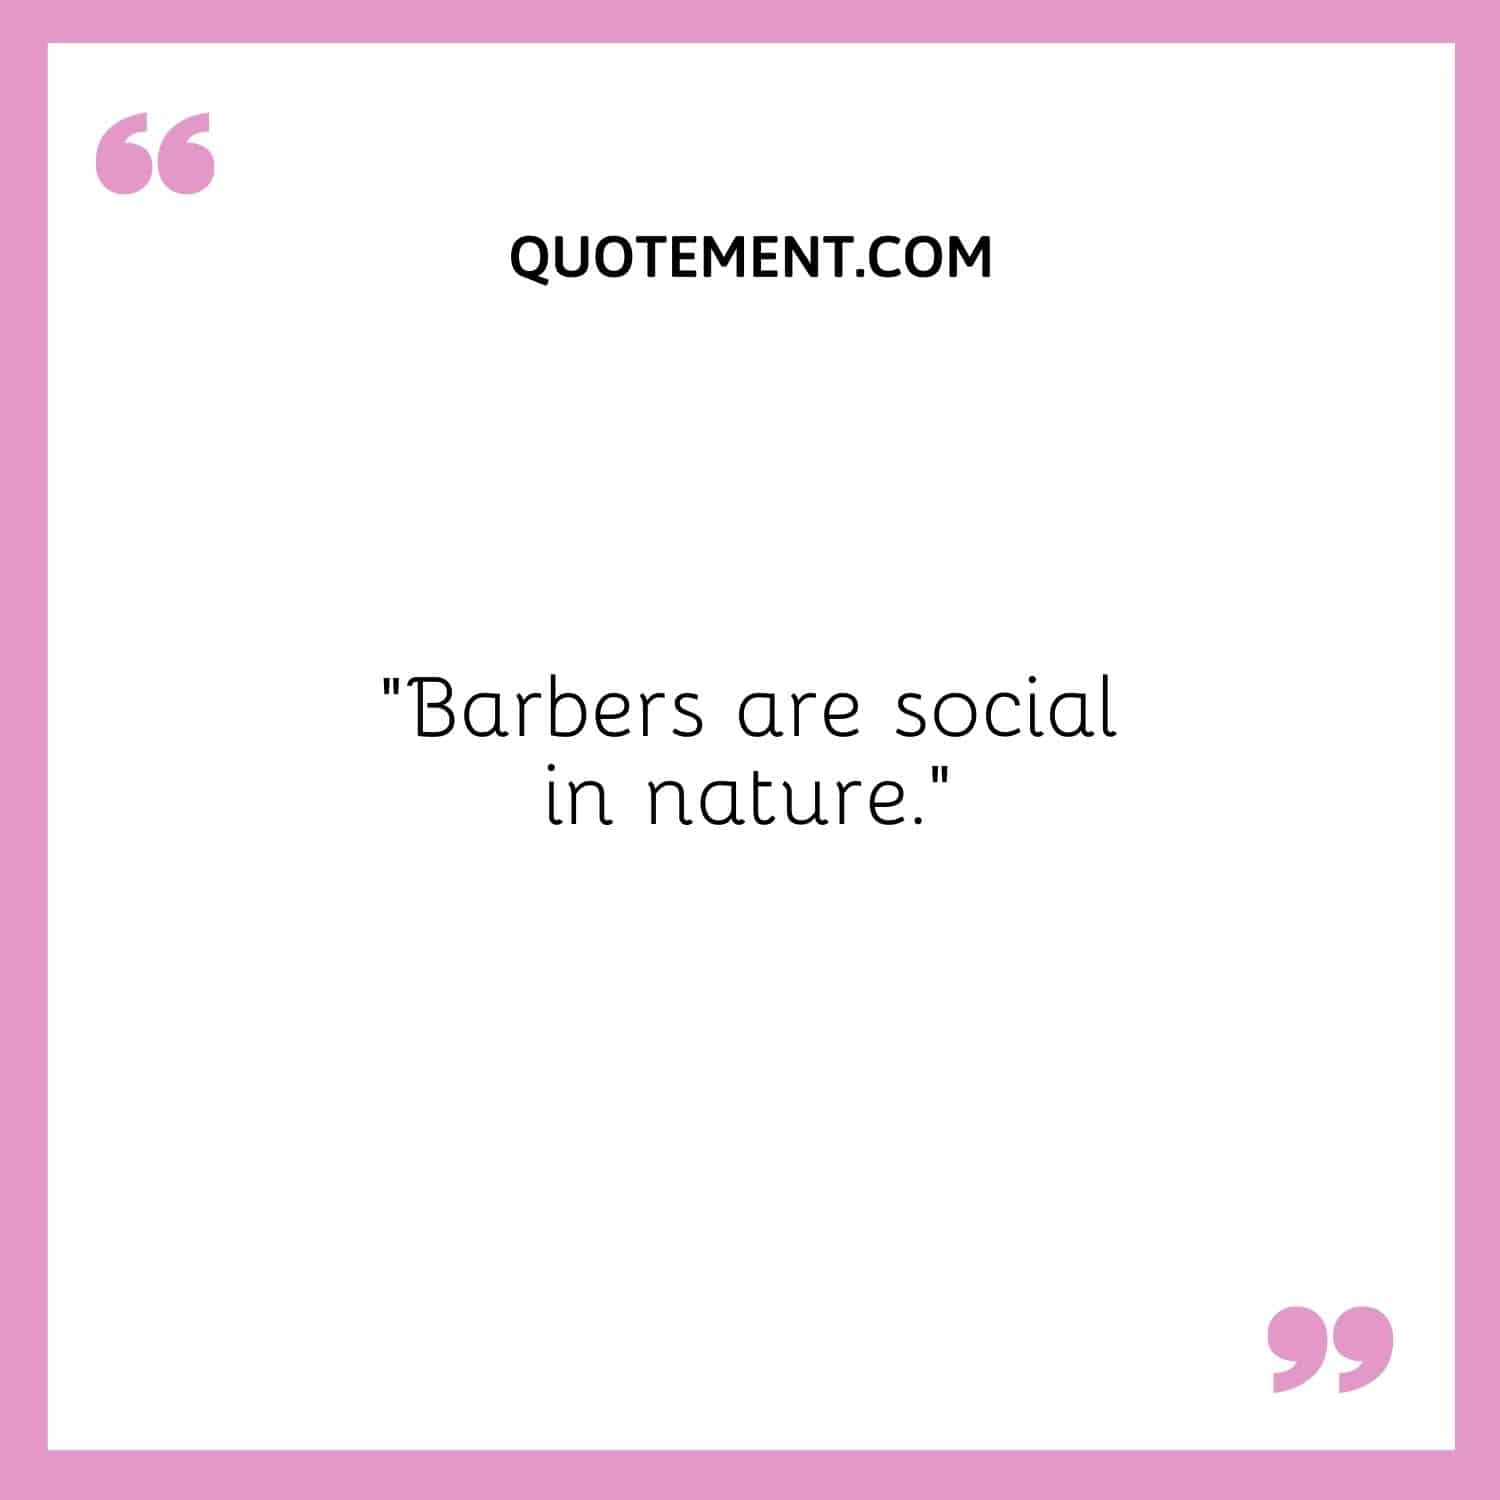 Barbers are social in nature.